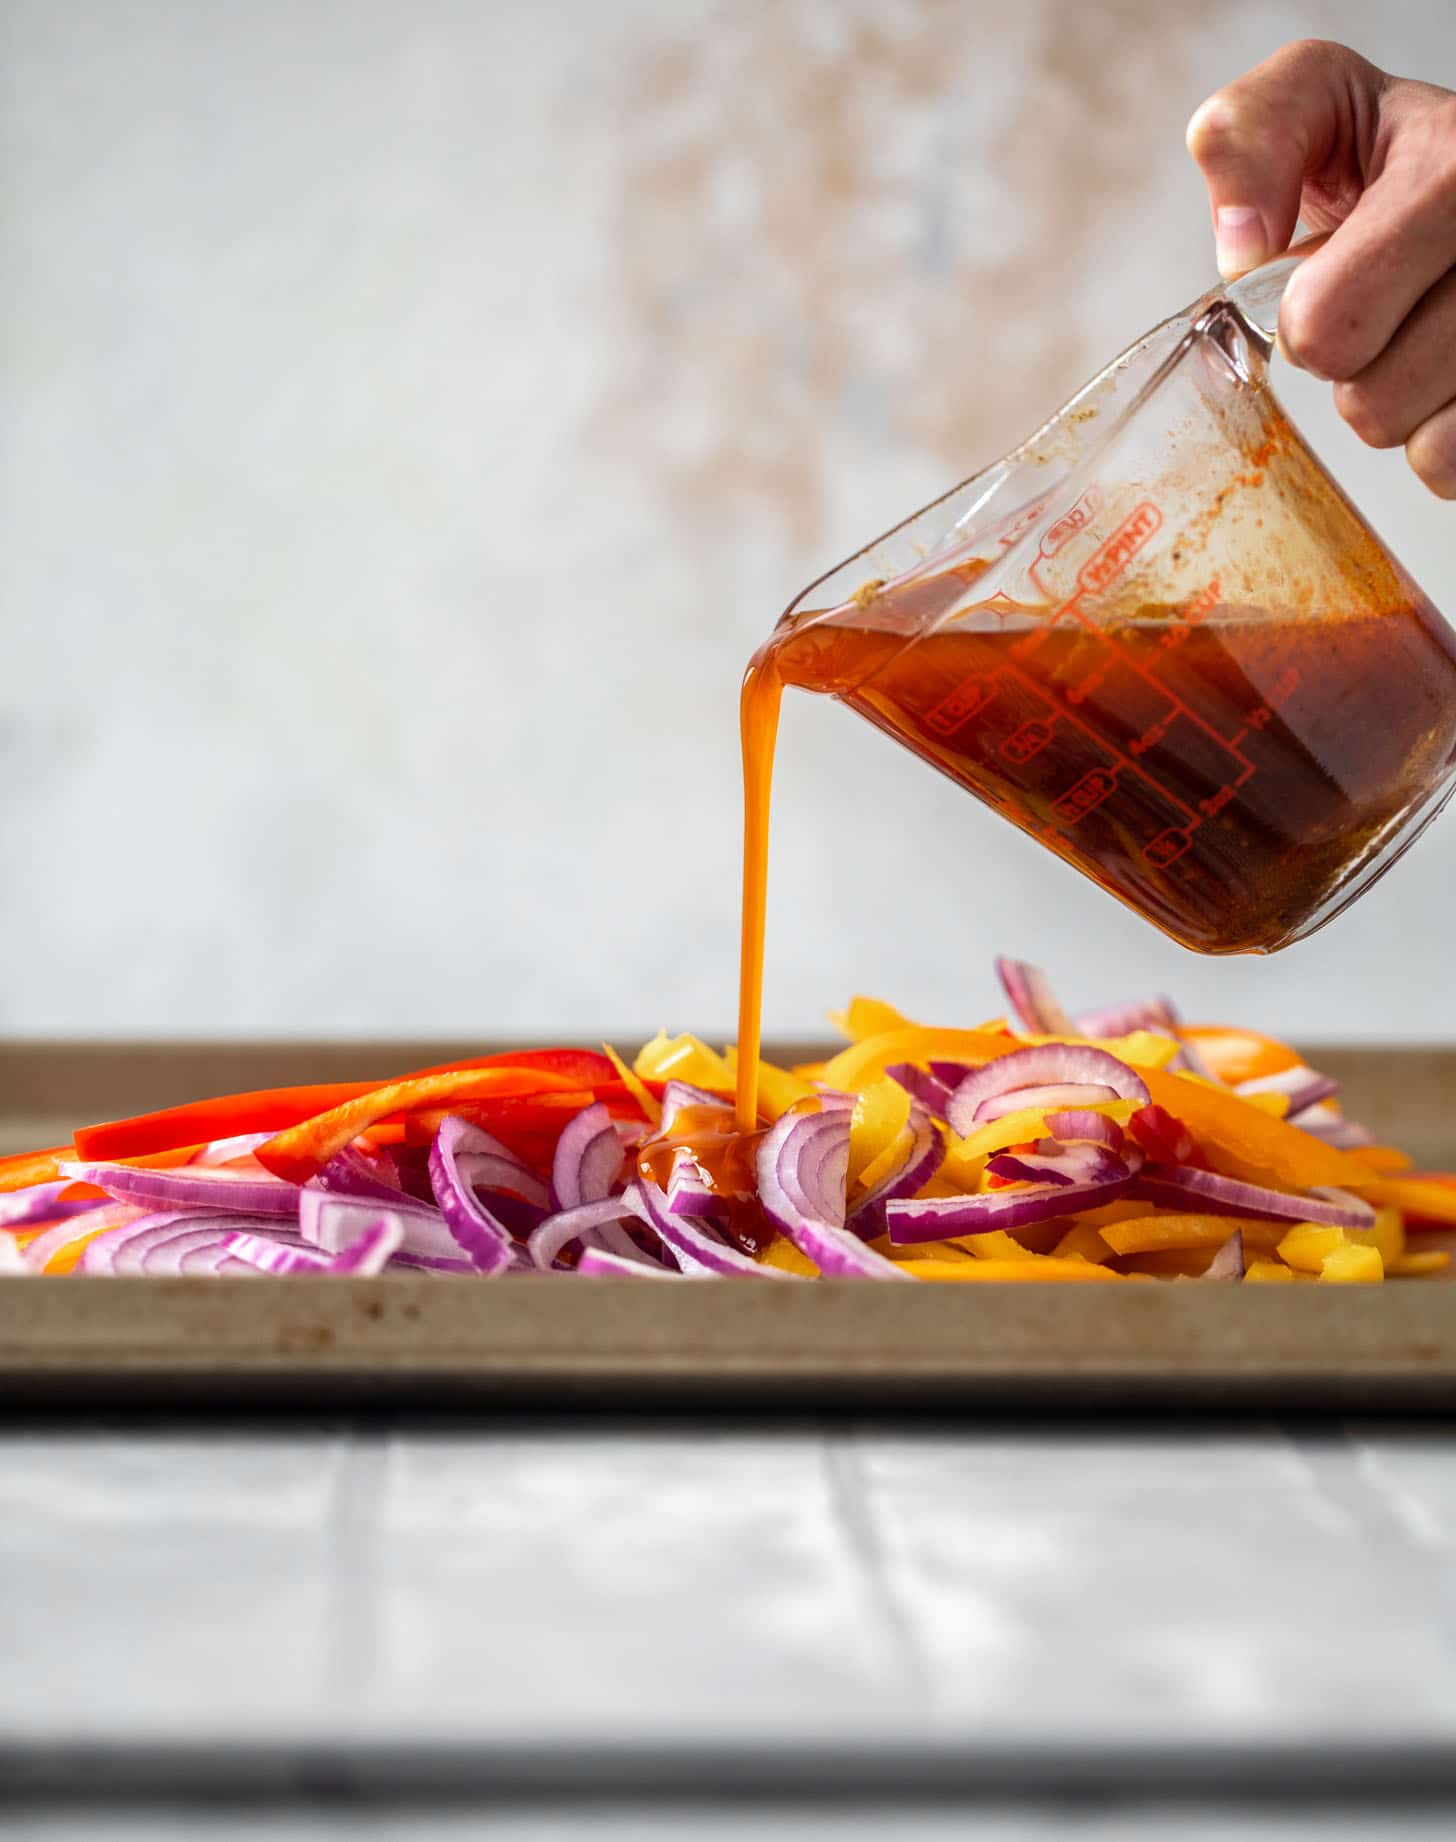 pouring fajita marinade on peppers and onions